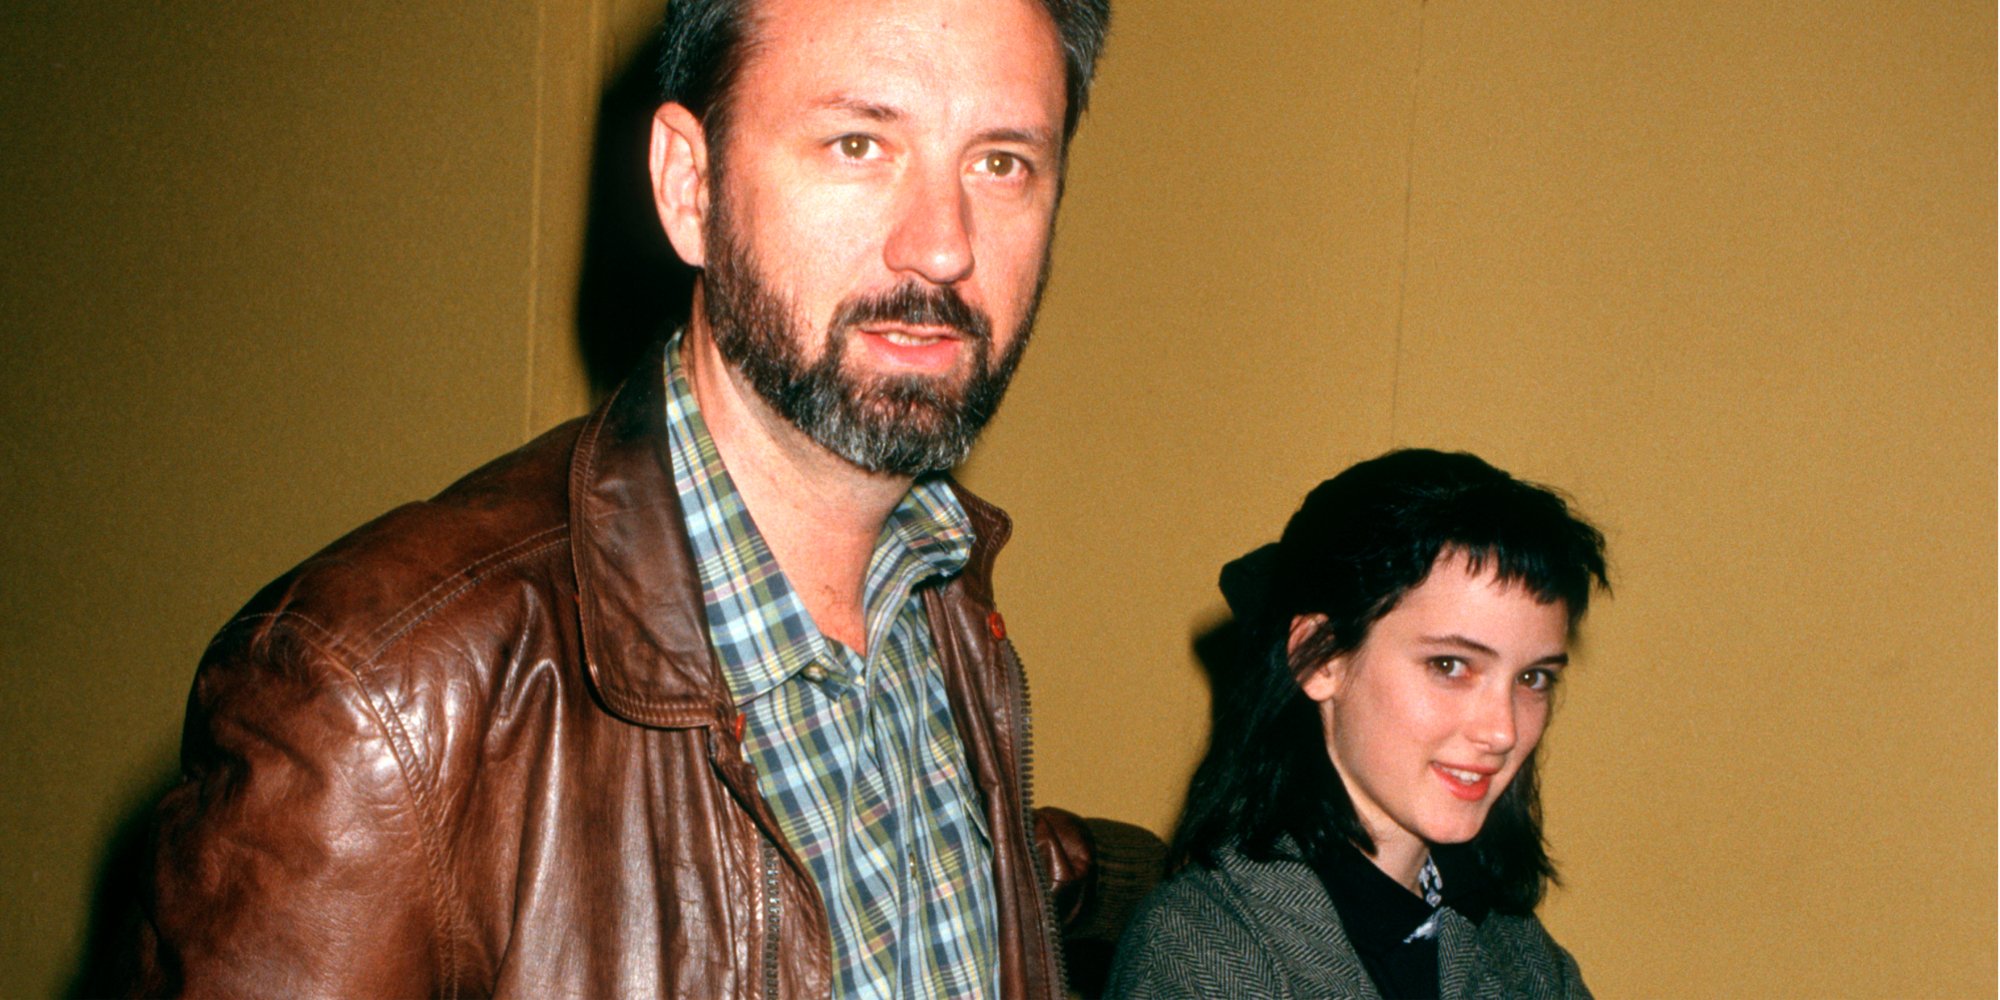 Former 'The Monkees' star Mike Nesmith and actor Winona Ryder.